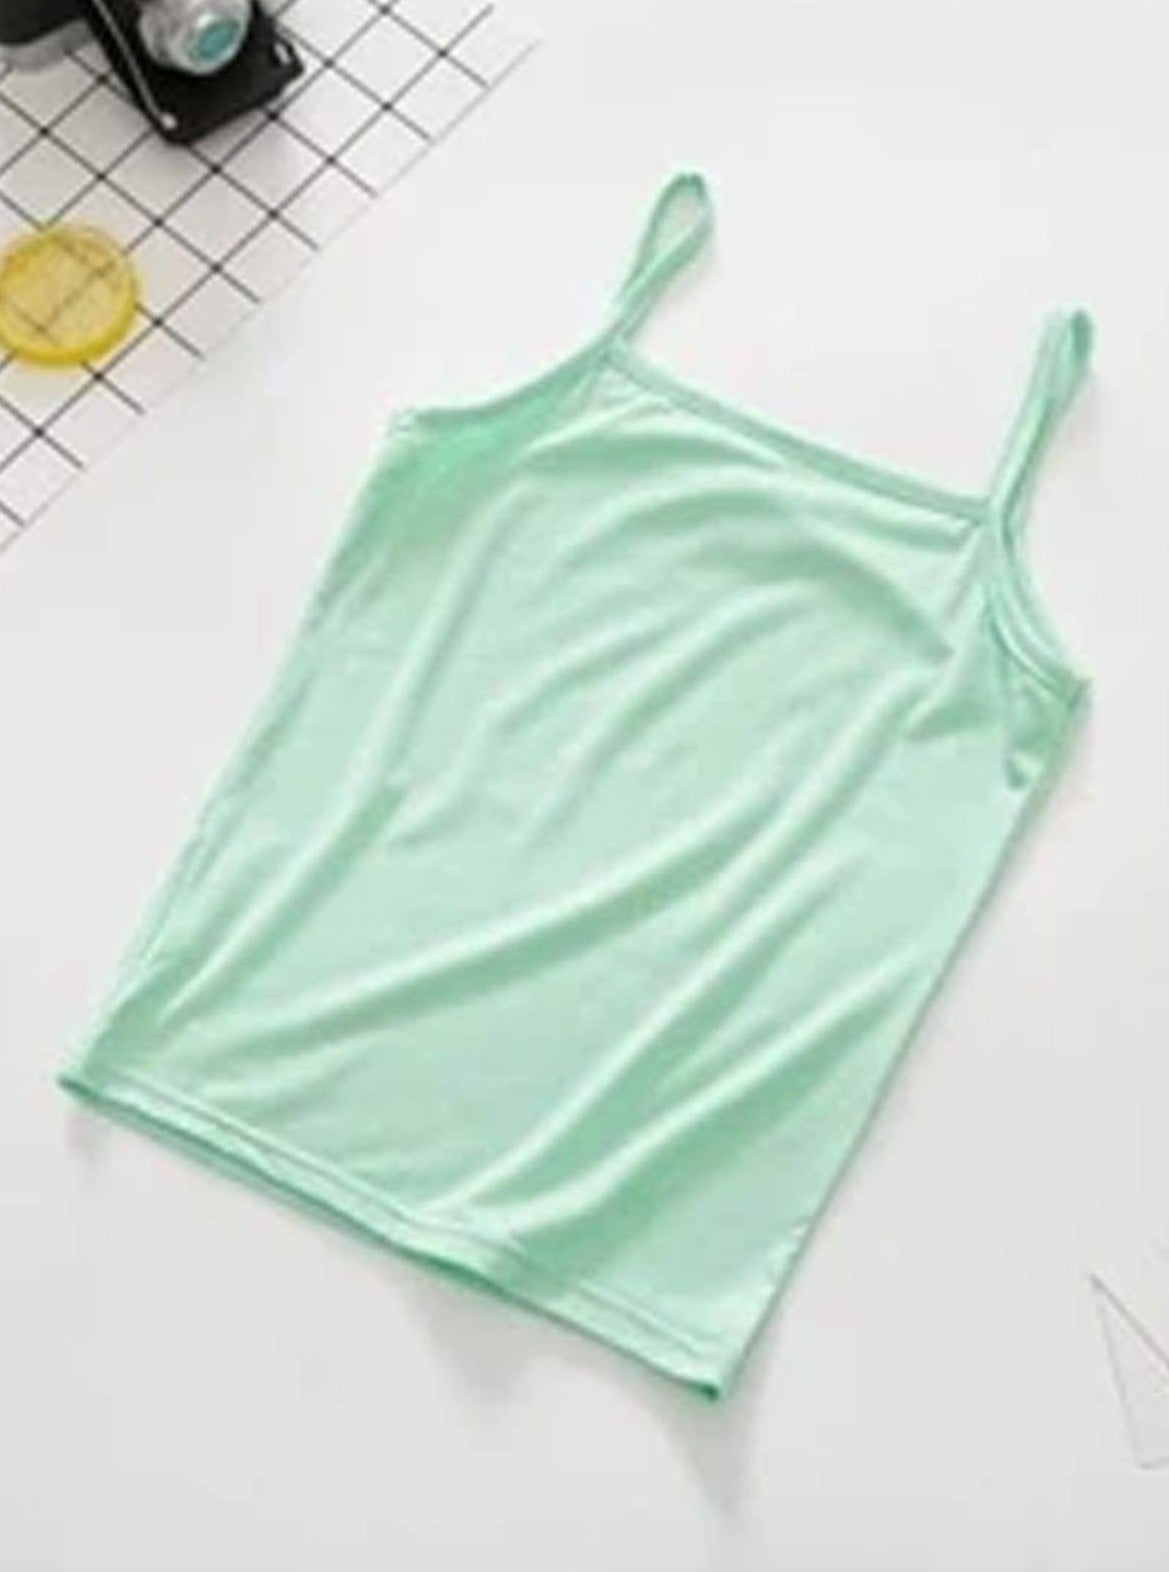 Girls Solid Camisole Tank Top - Green / 2T - Girls Spring Casual Top